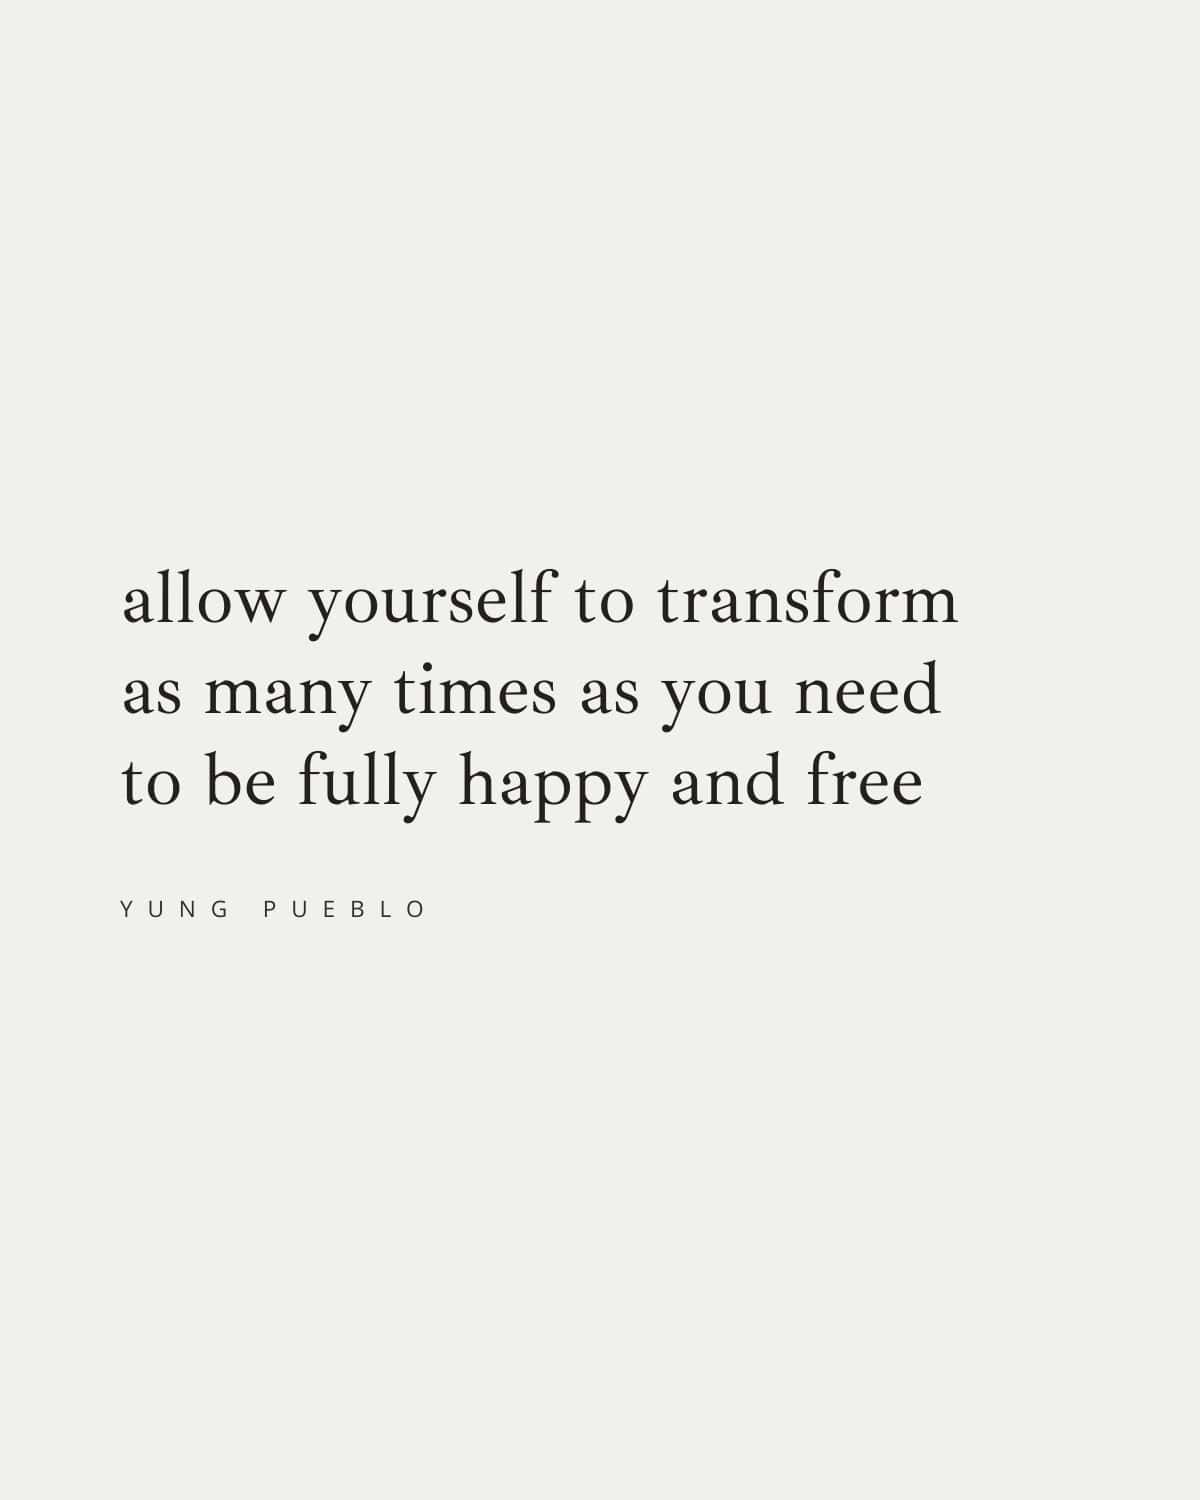 allow yourself to transform 
as many times as you need 
to be fully happy and free
—yung pueblo